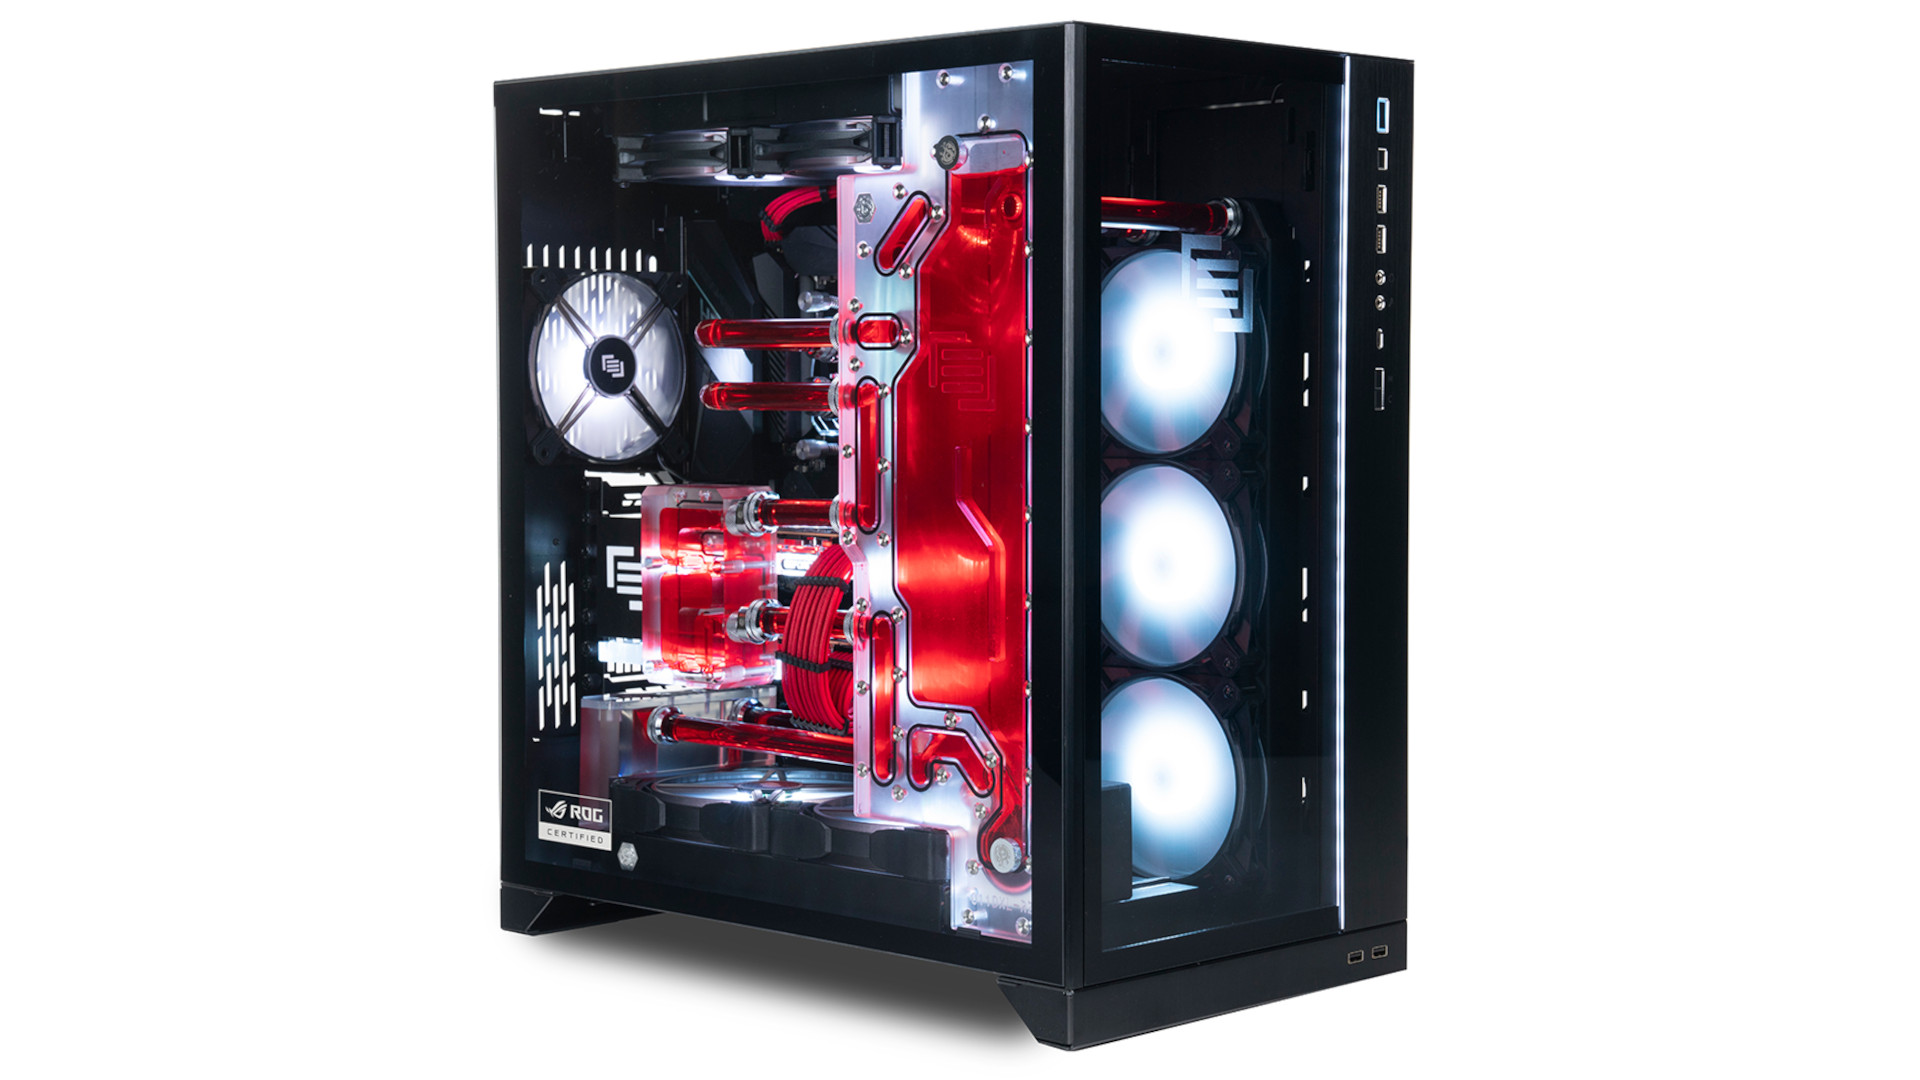 Esports PC - Best PC for Gaming and Streaming